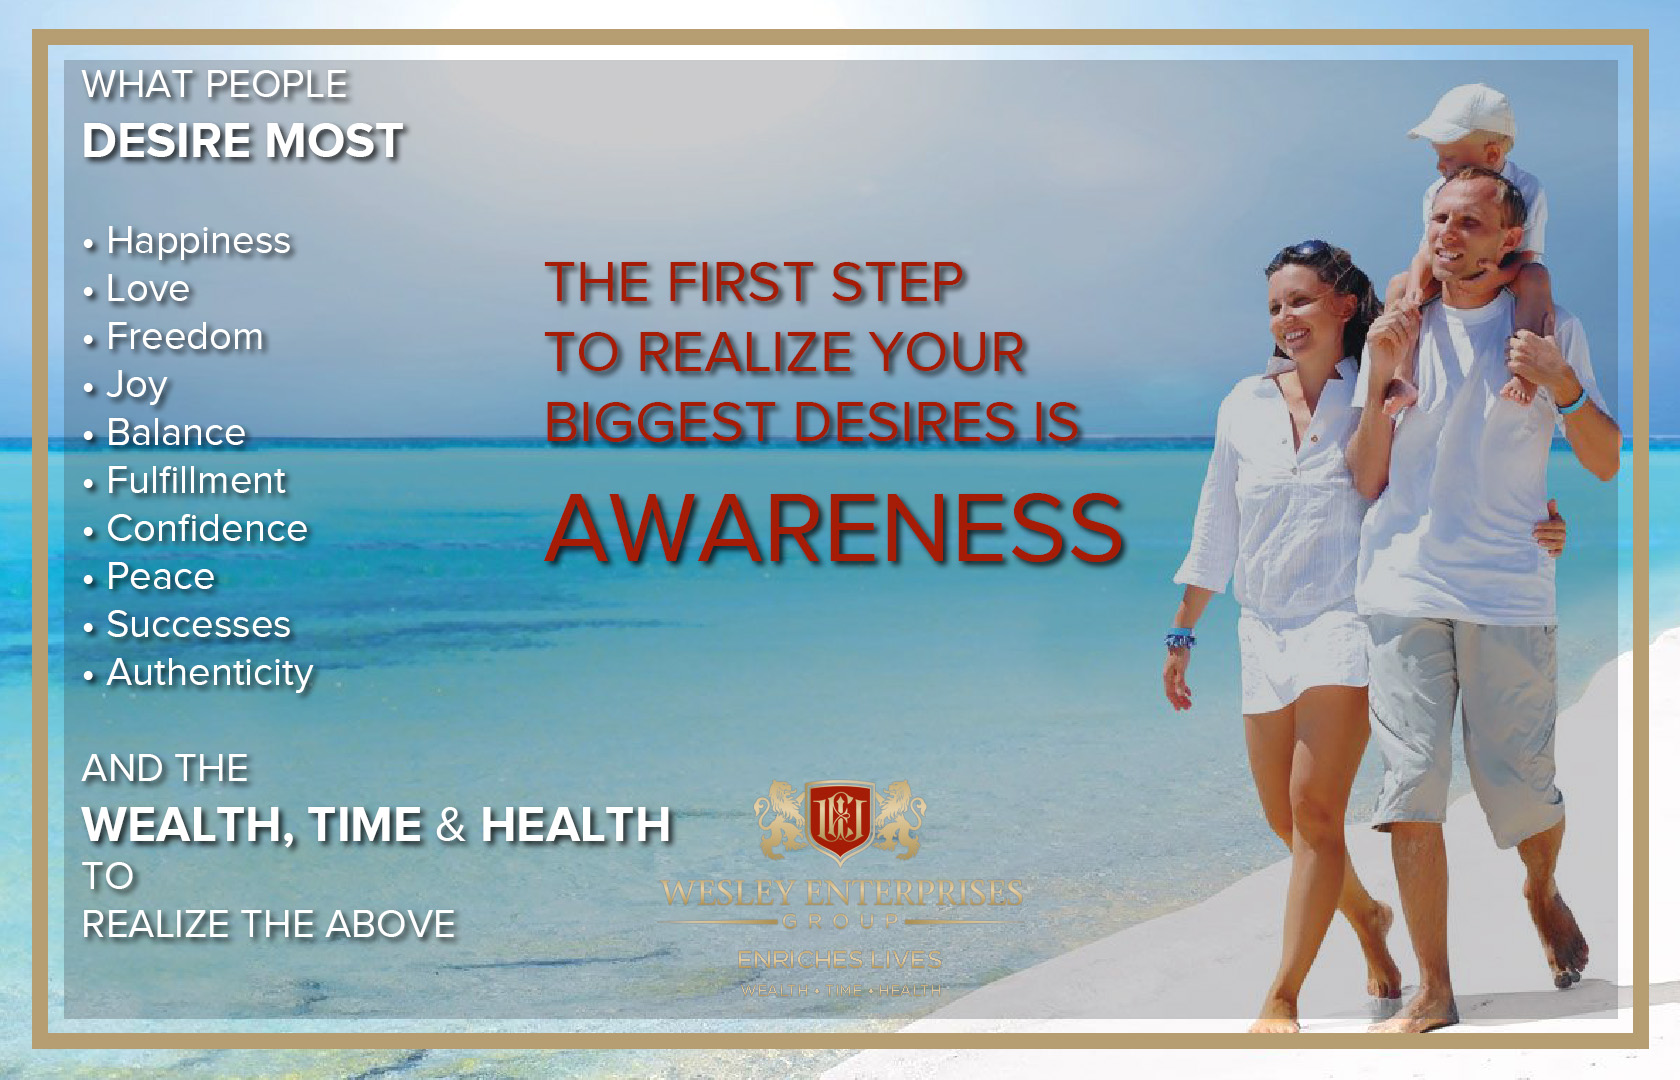 The first step - Awareness